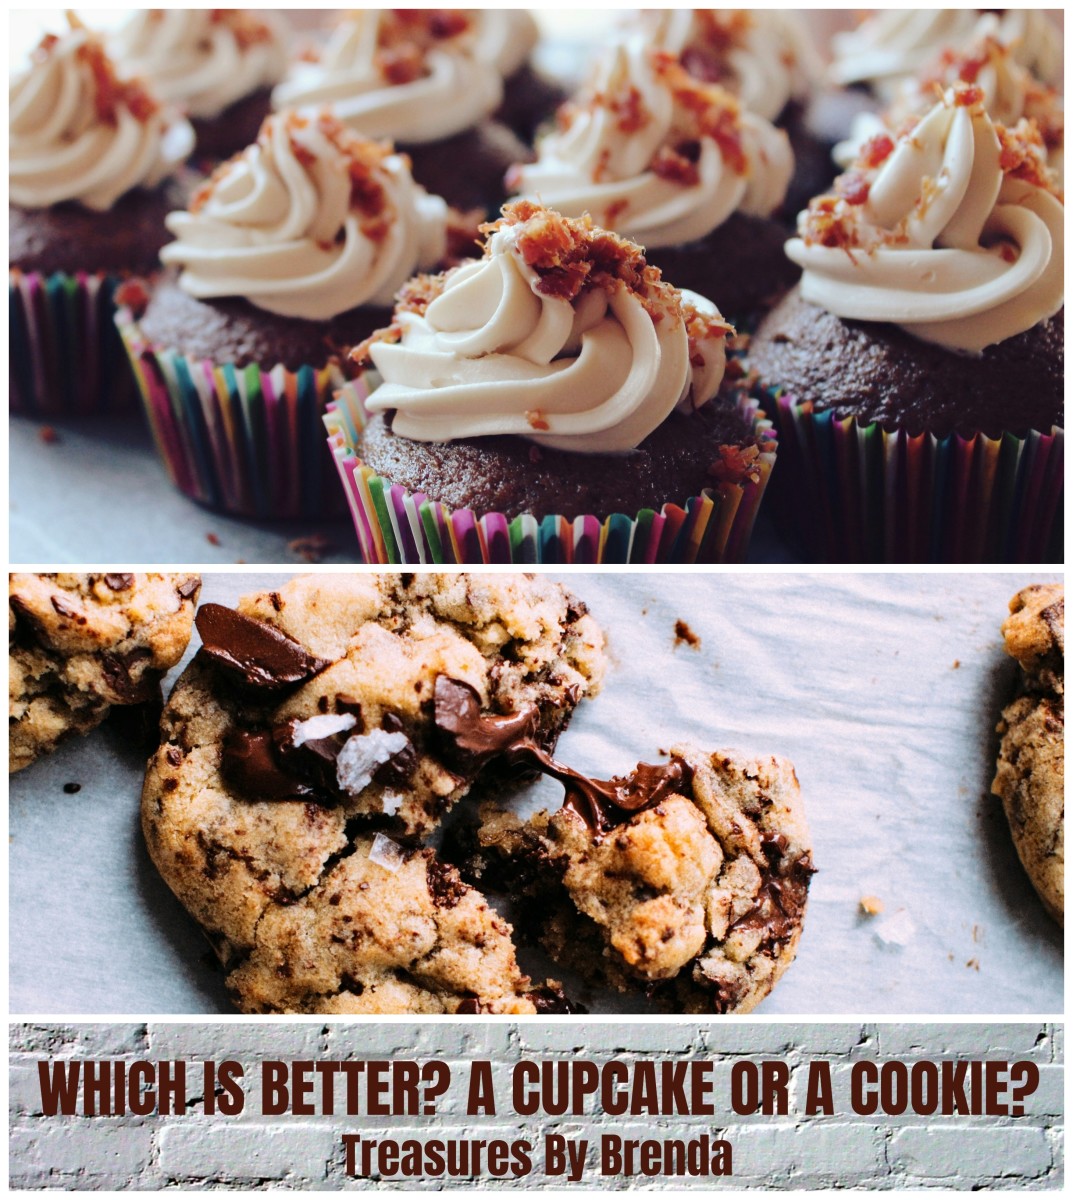 Which Is Better a Cupcake or a Cookie?